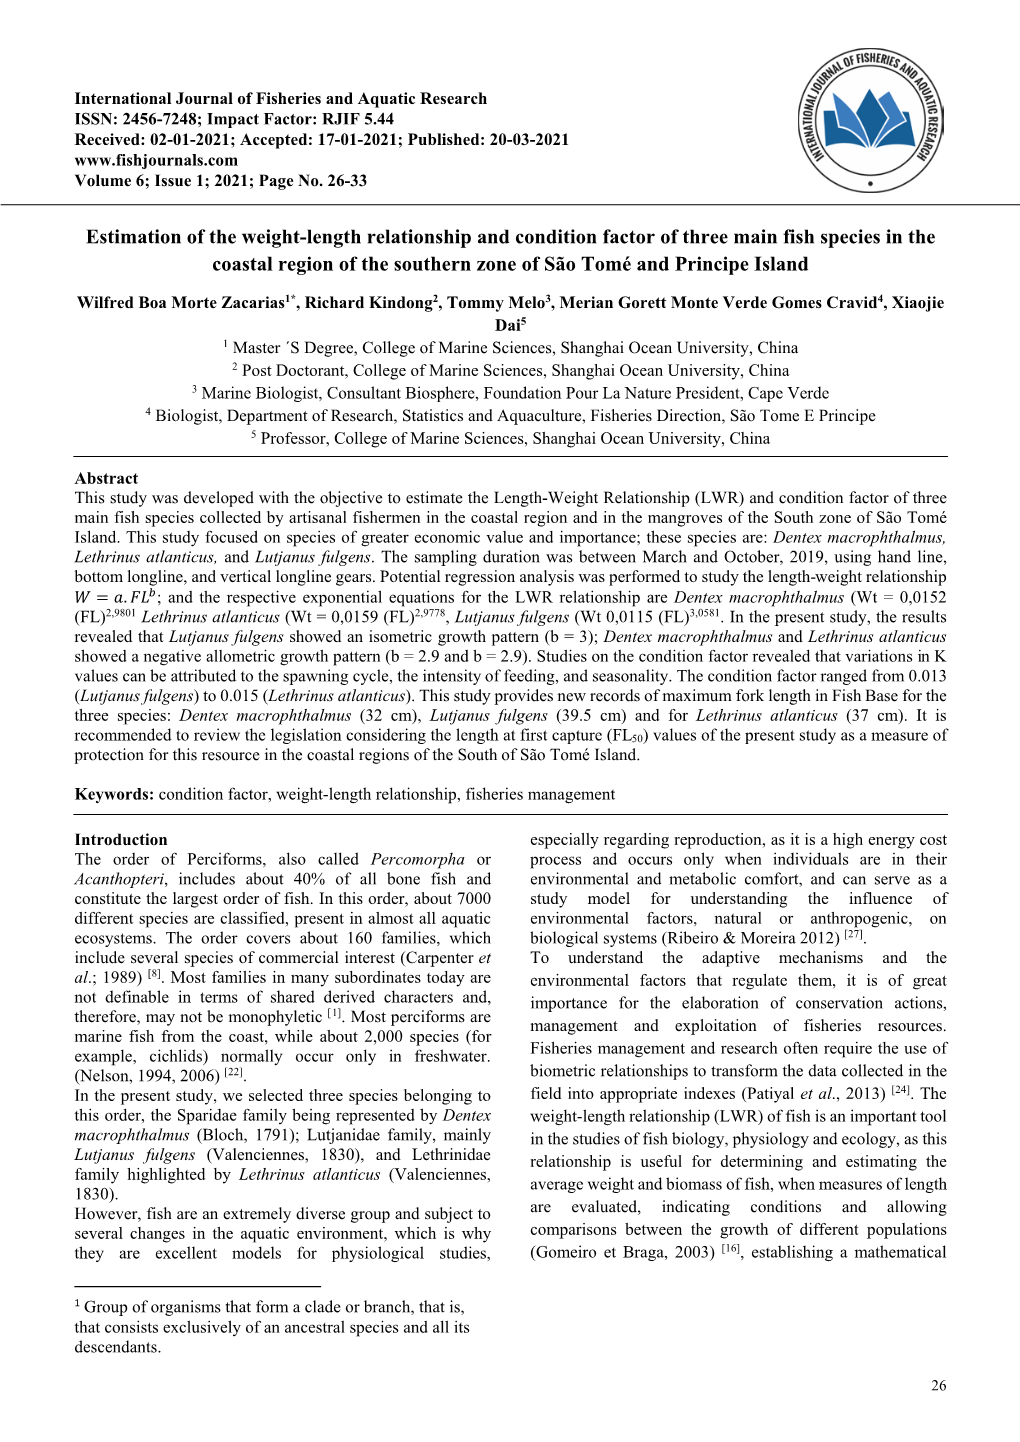 Estimation of the Weight-Length Relationship and Condition Factor of Three Main Fish Species in the Coastal Region of the Southe